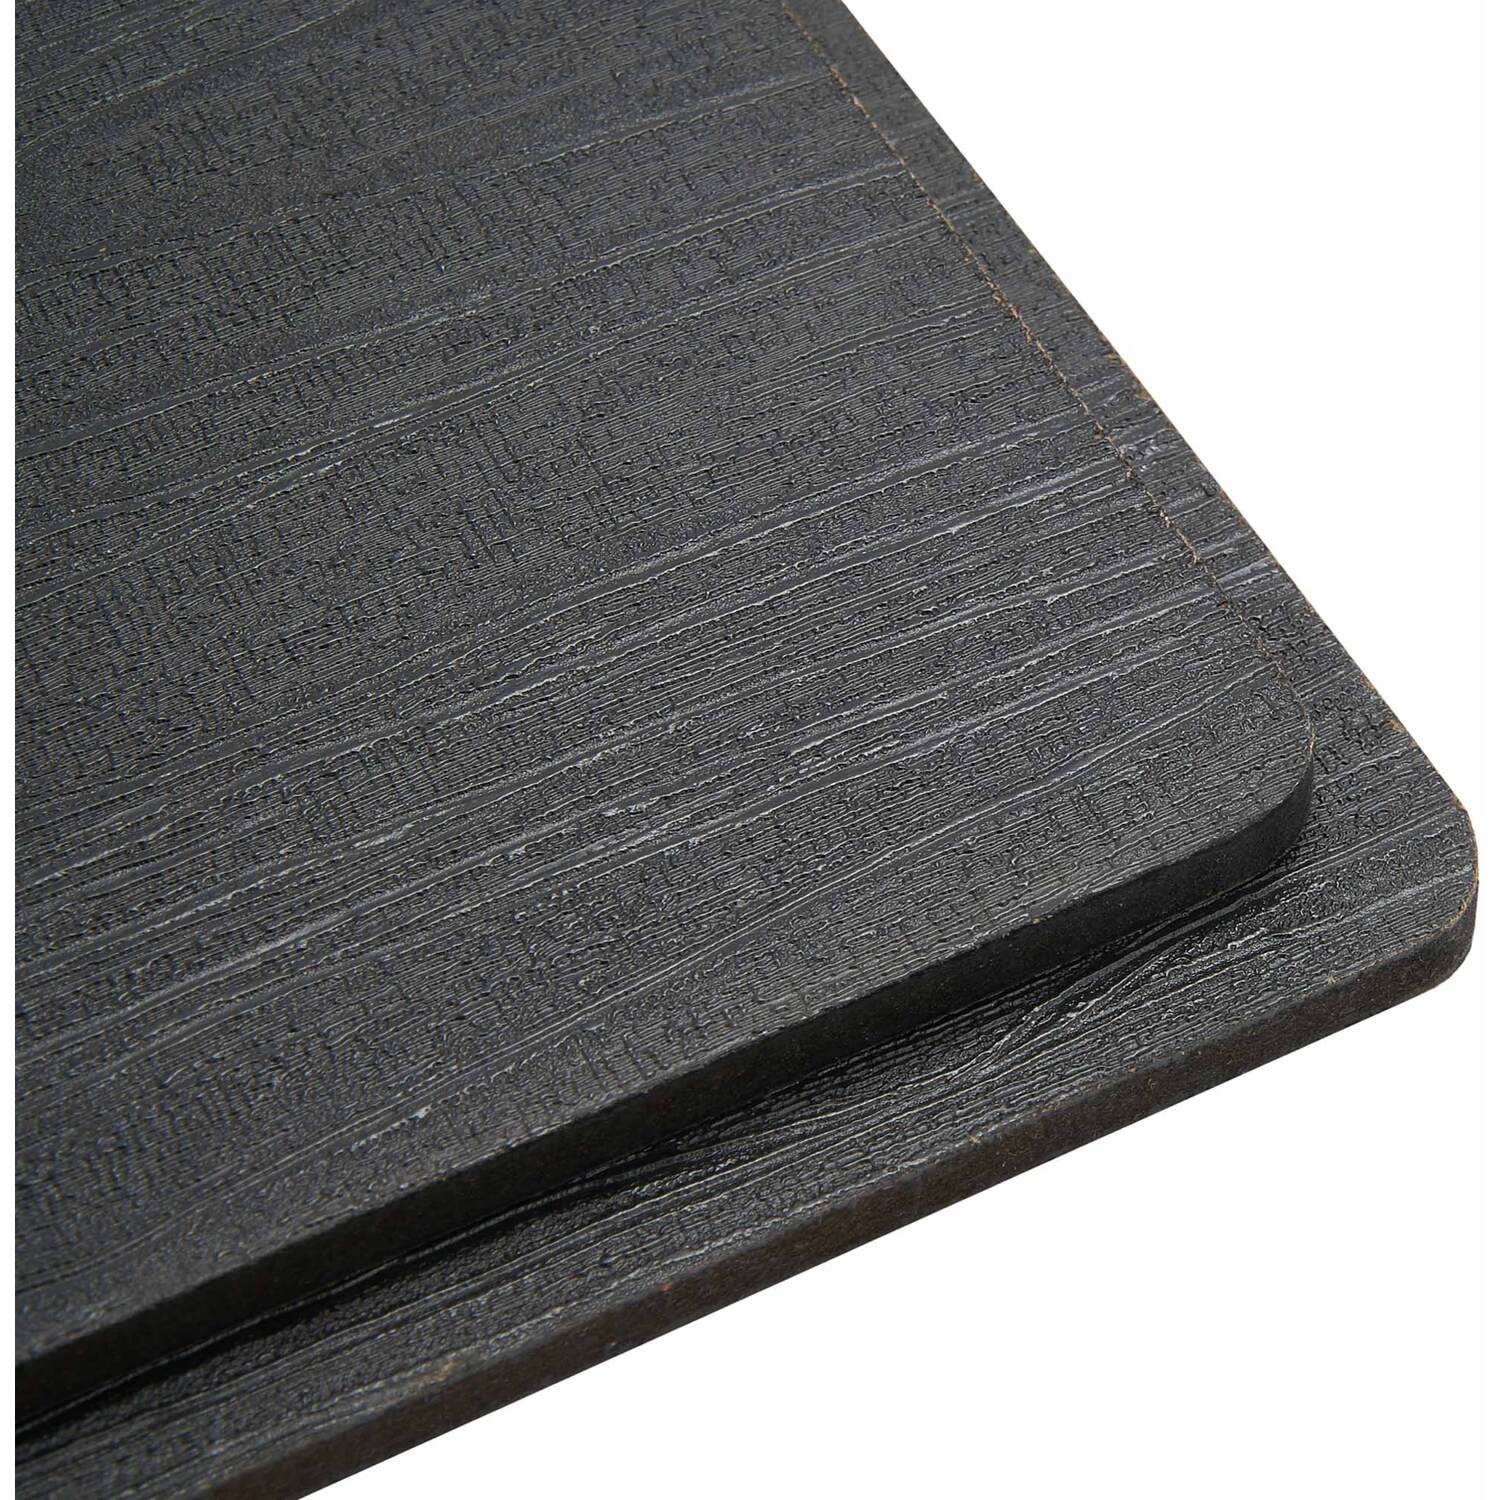 Pack of 2 Malmo Wood Effect Placemats - Black Image 2